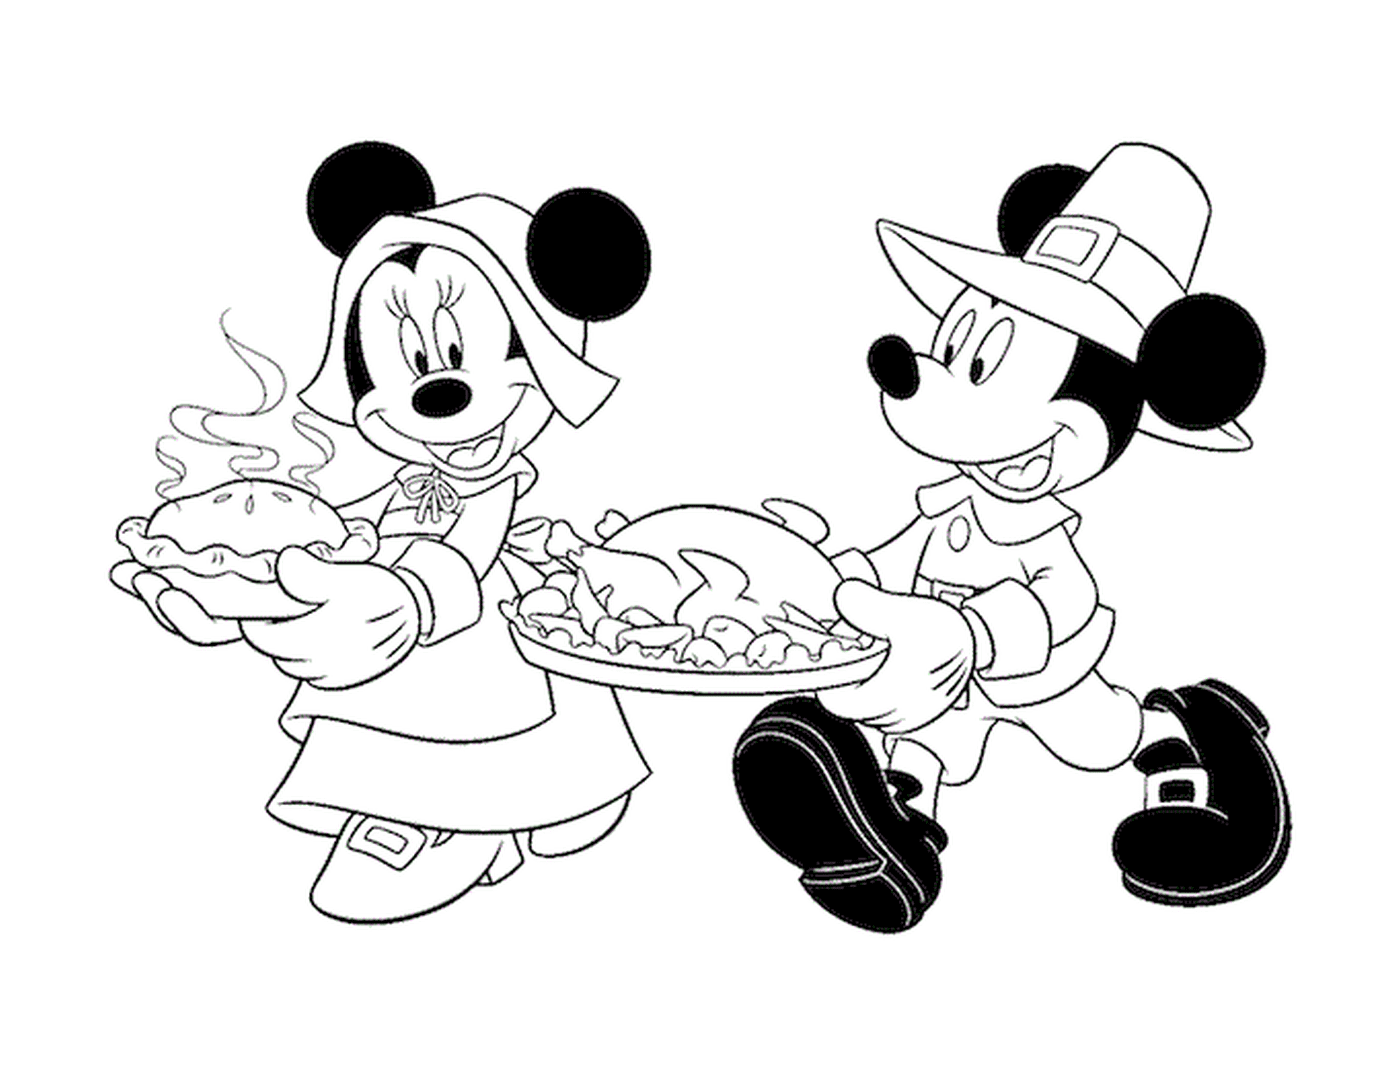  Mickey Mouse holding a turkey plate 